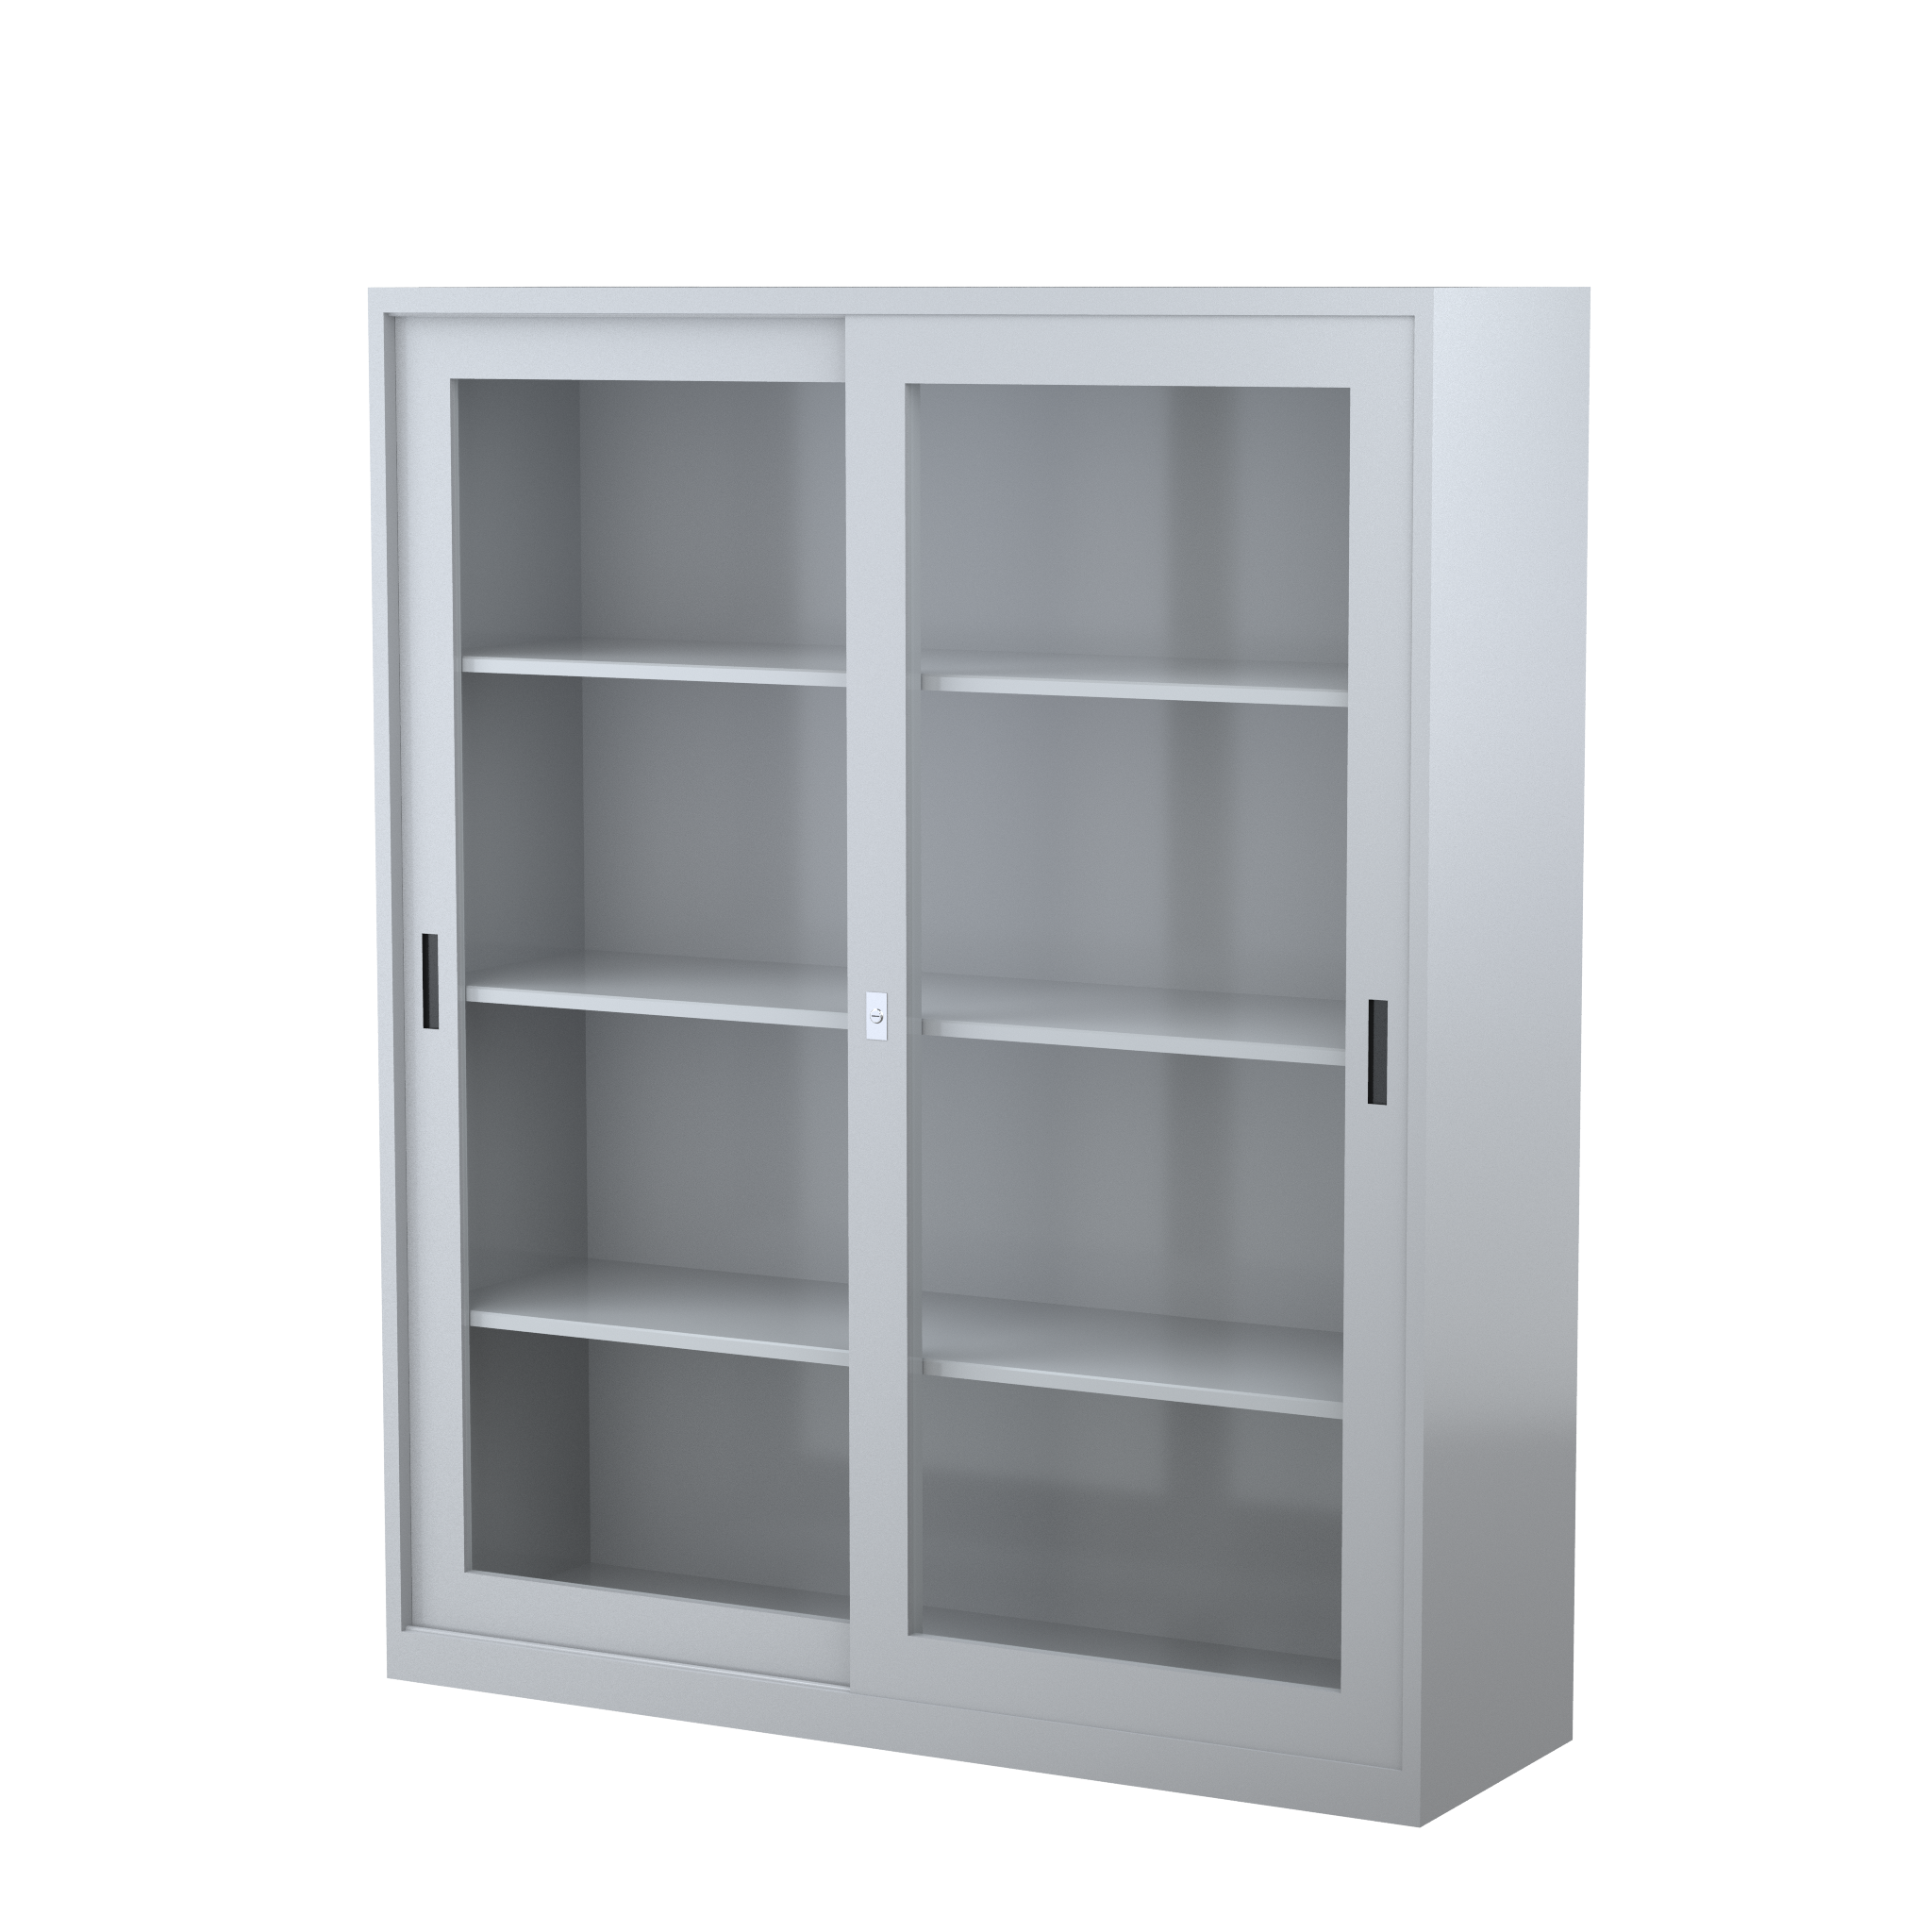 GD1830_1500 - STEELCO SG Cabinet 1830H x 1500W  465D - 3 Shelves-SG.png